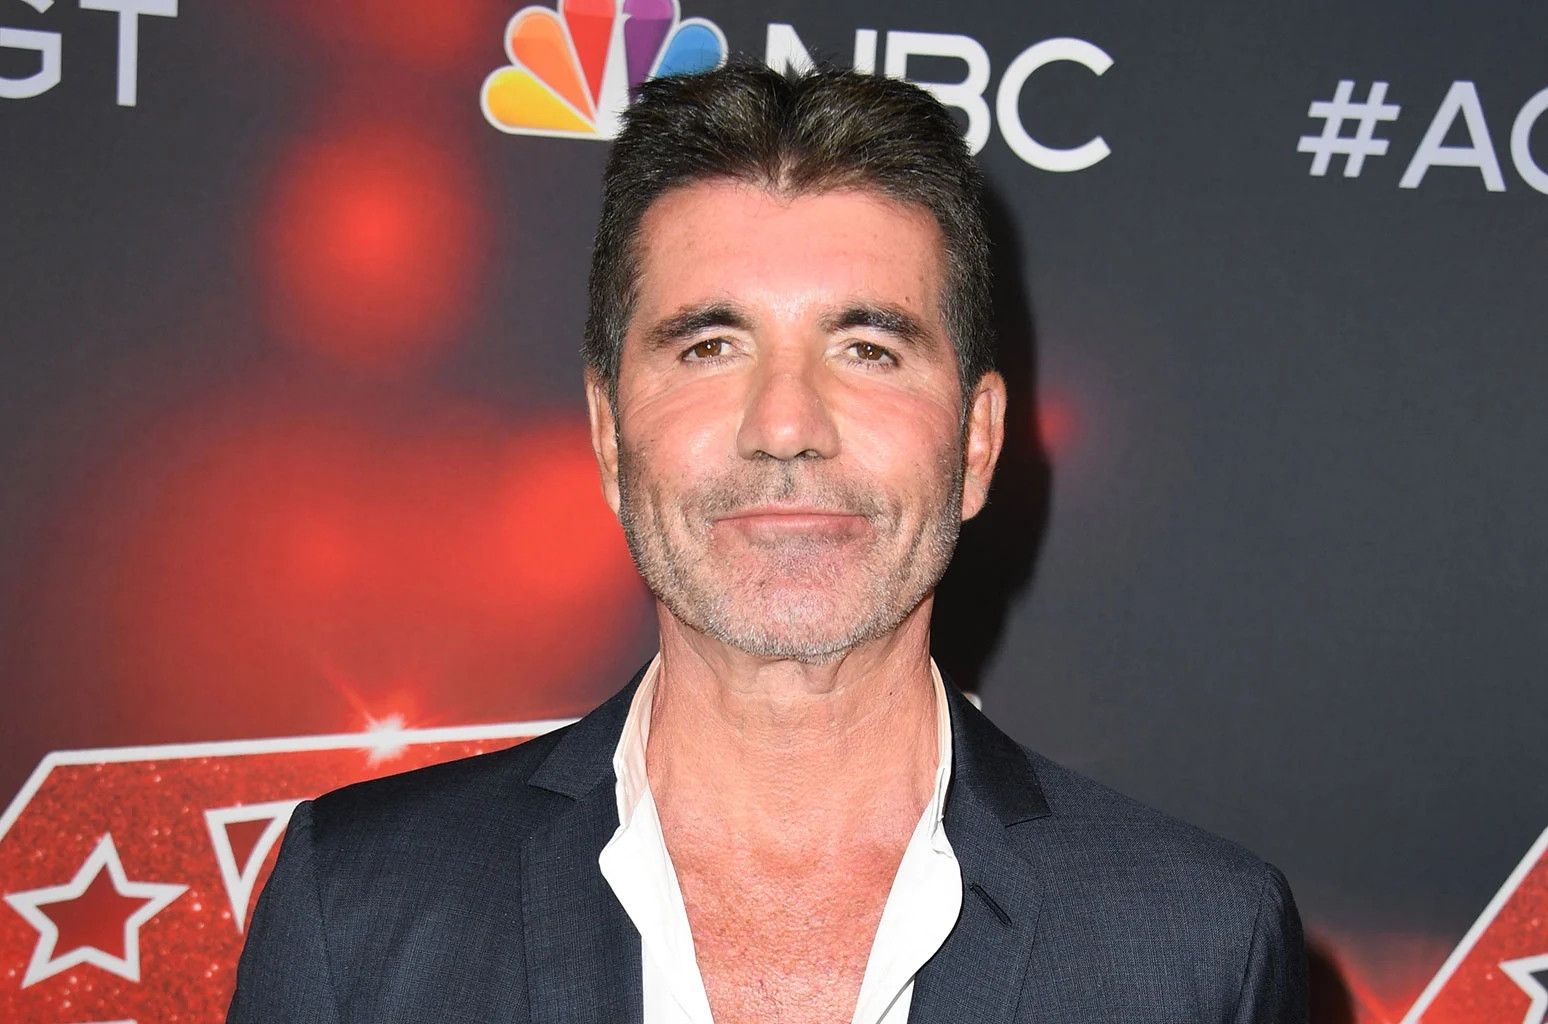 simon-cowell-shows-support-for-harry-styles-after-spitgate-incident